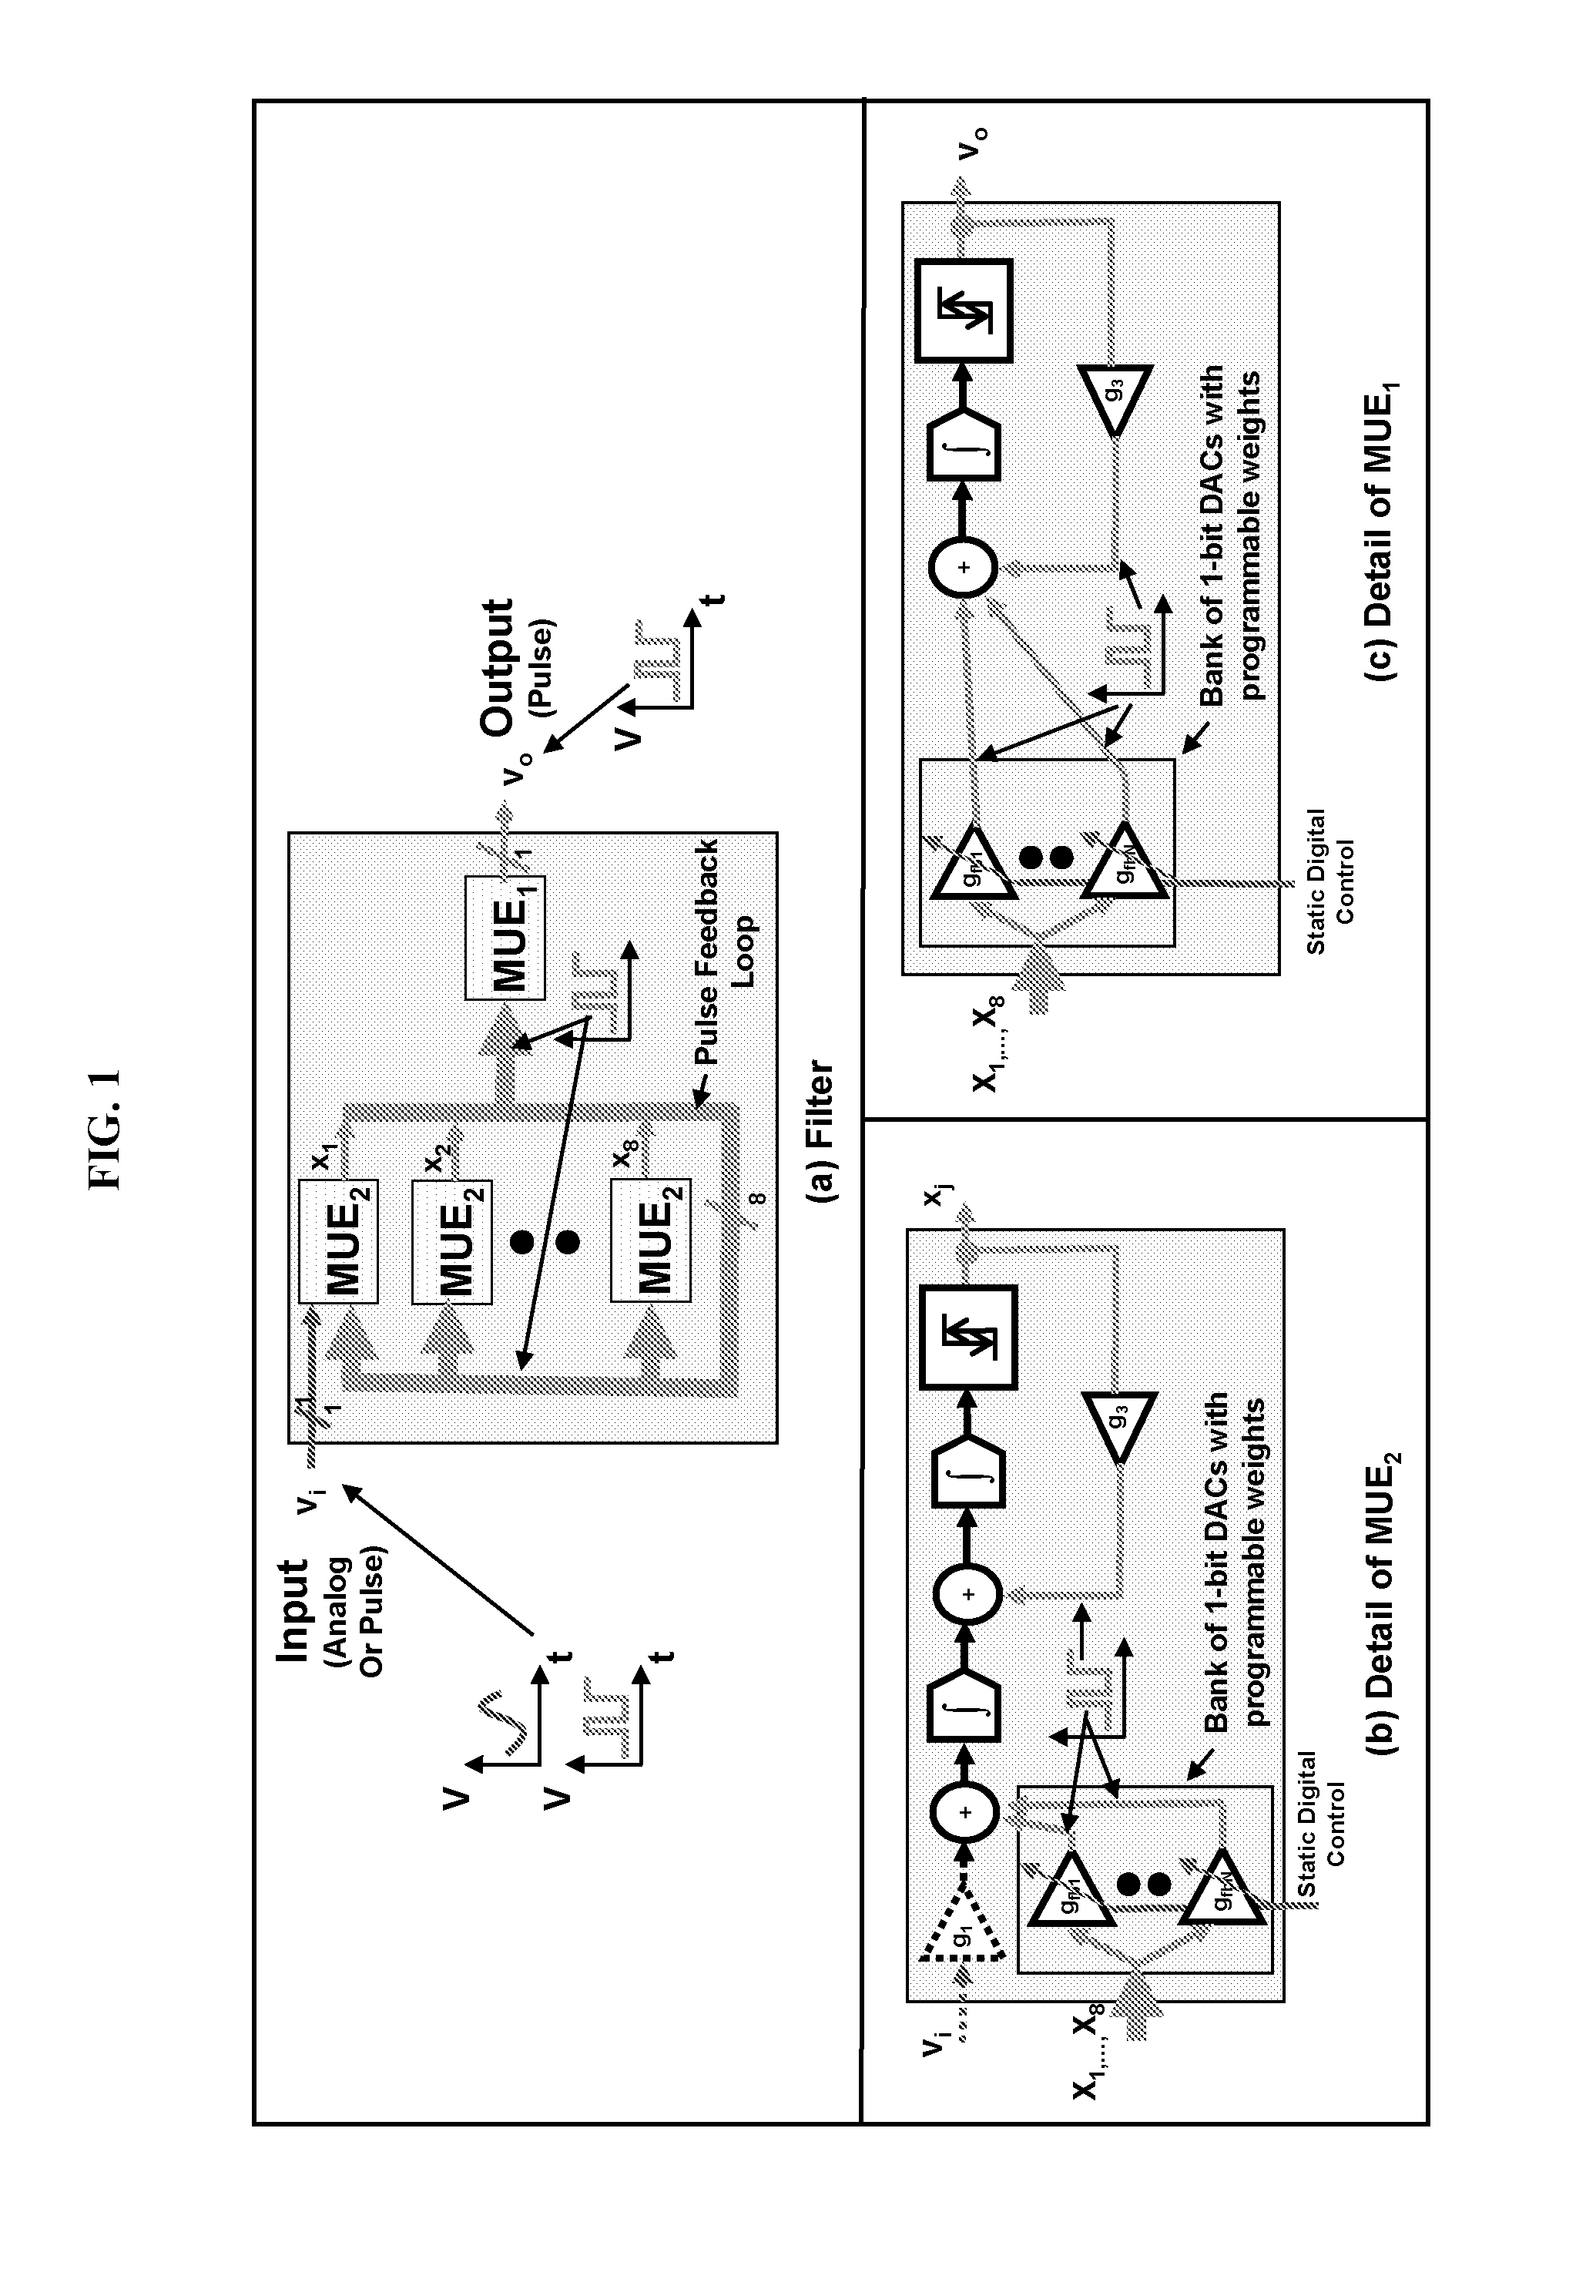 Down-converter and up-converter for time-encoded signals